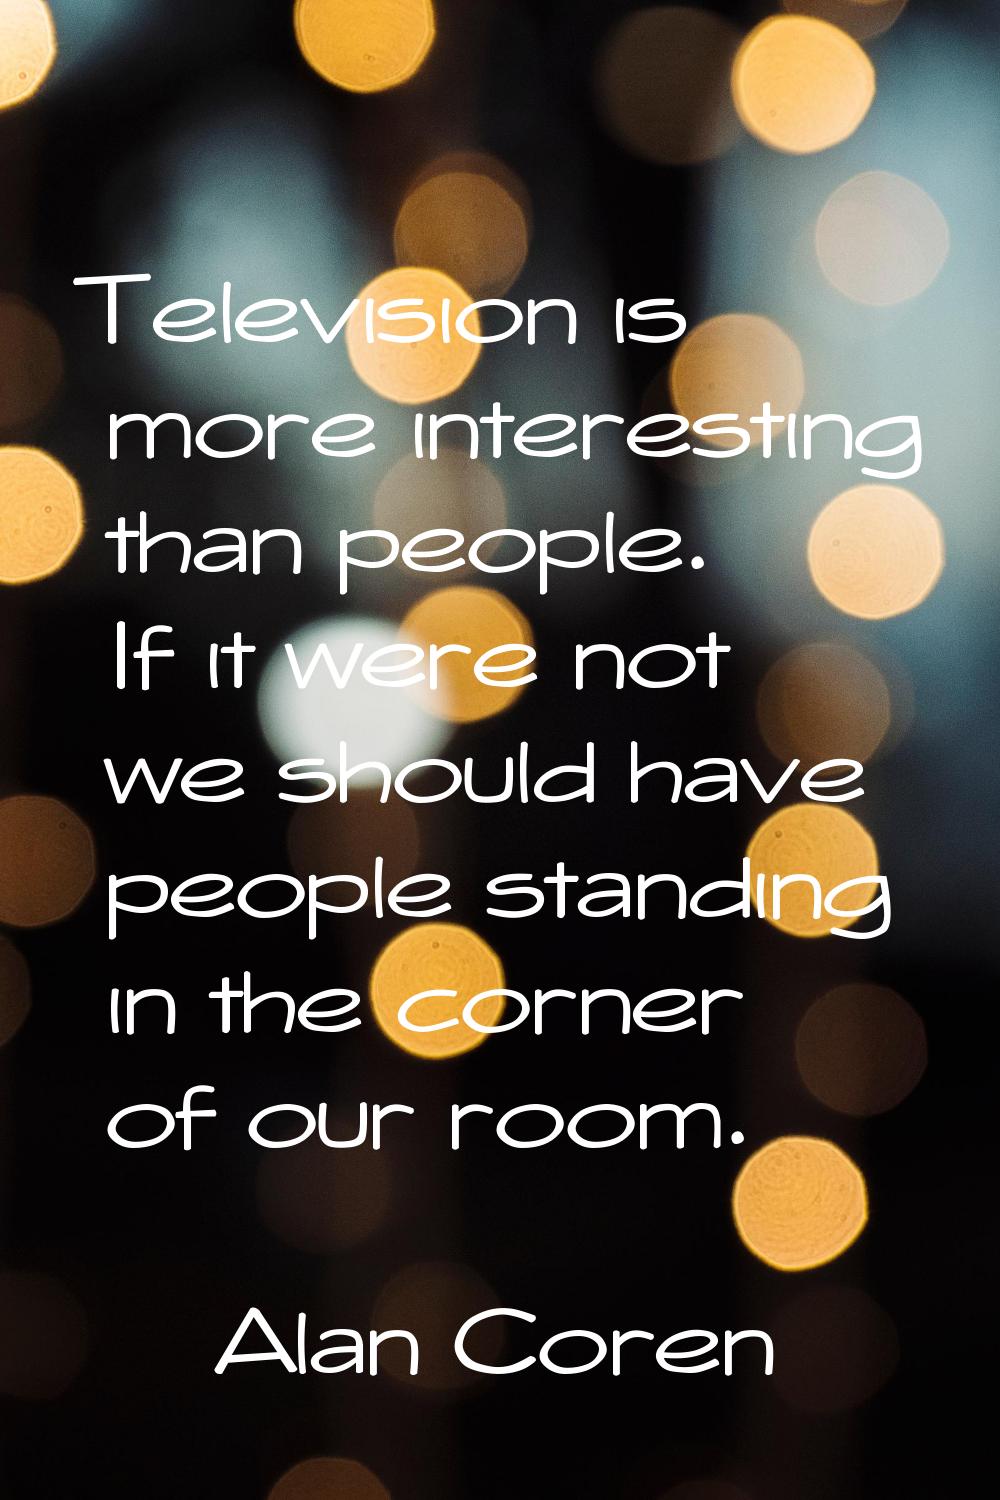 Television is more interesting than people. If it were not we should have people standing in the co